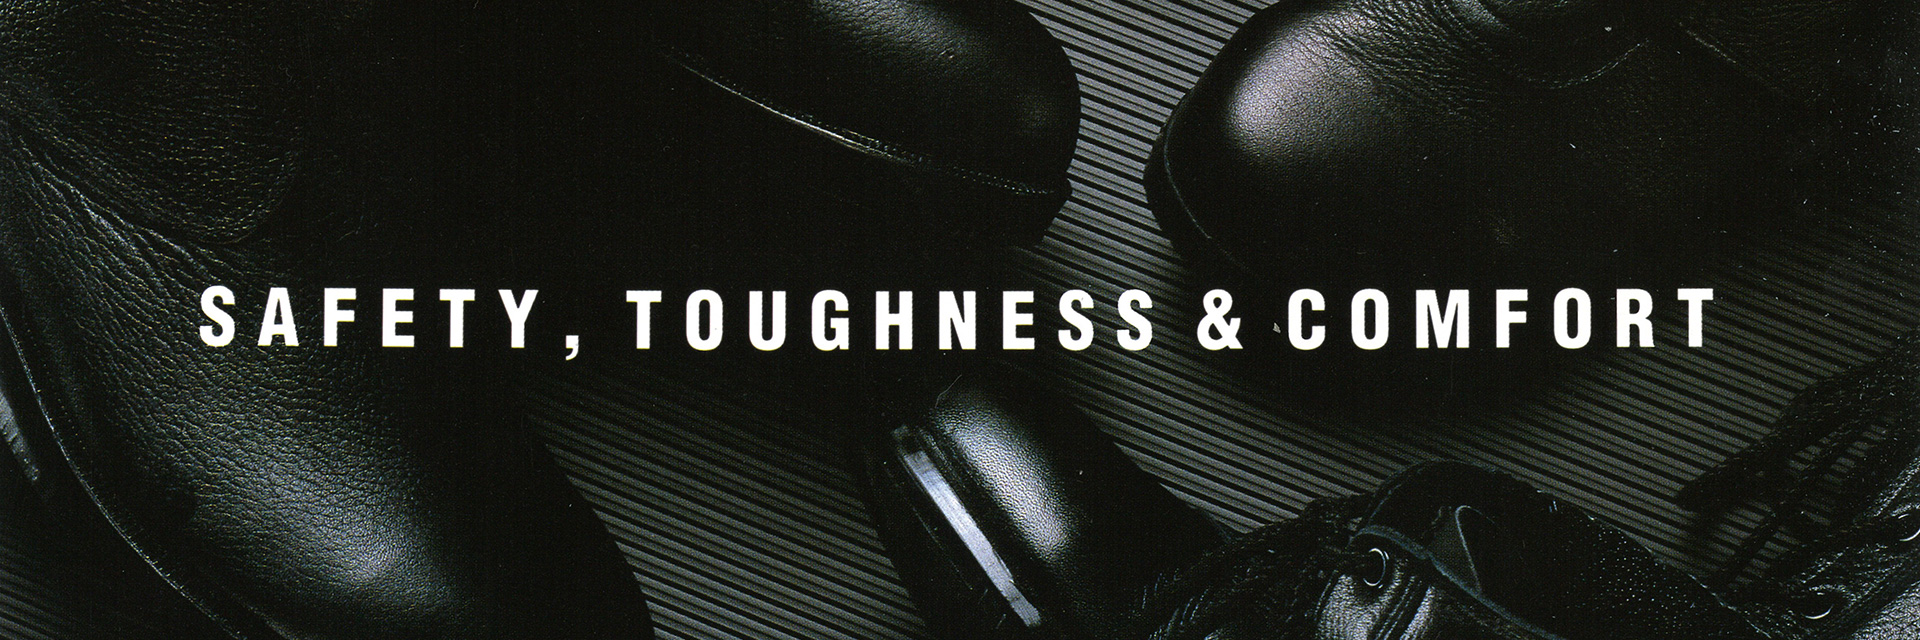 SAFETY,TOUGHNESS&COMFORT